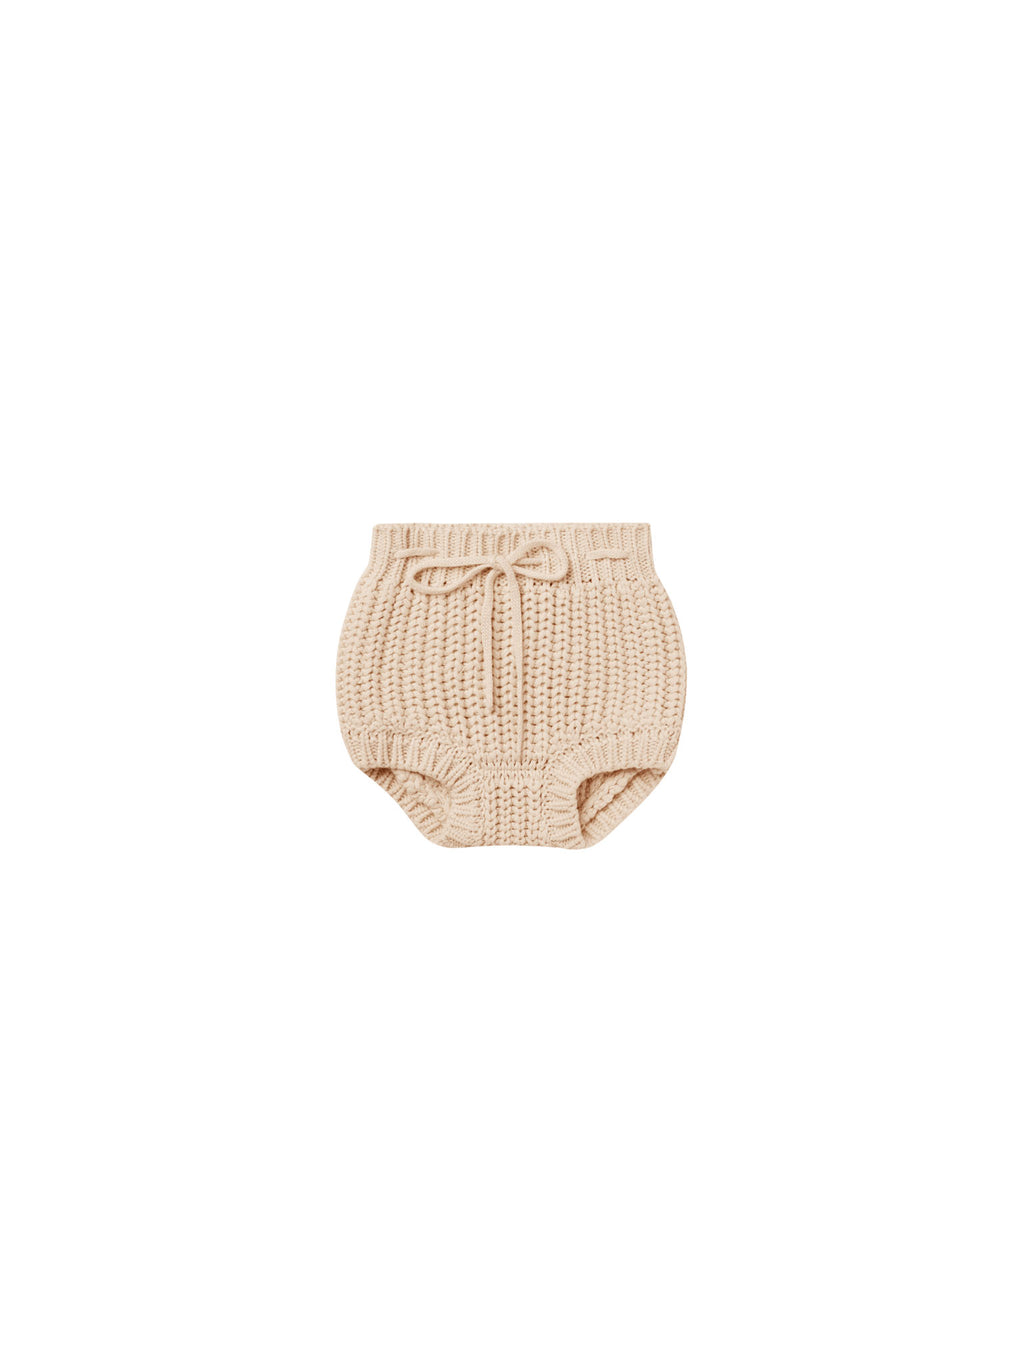 Quincy Mae Knit Tie Bloomer - Shell